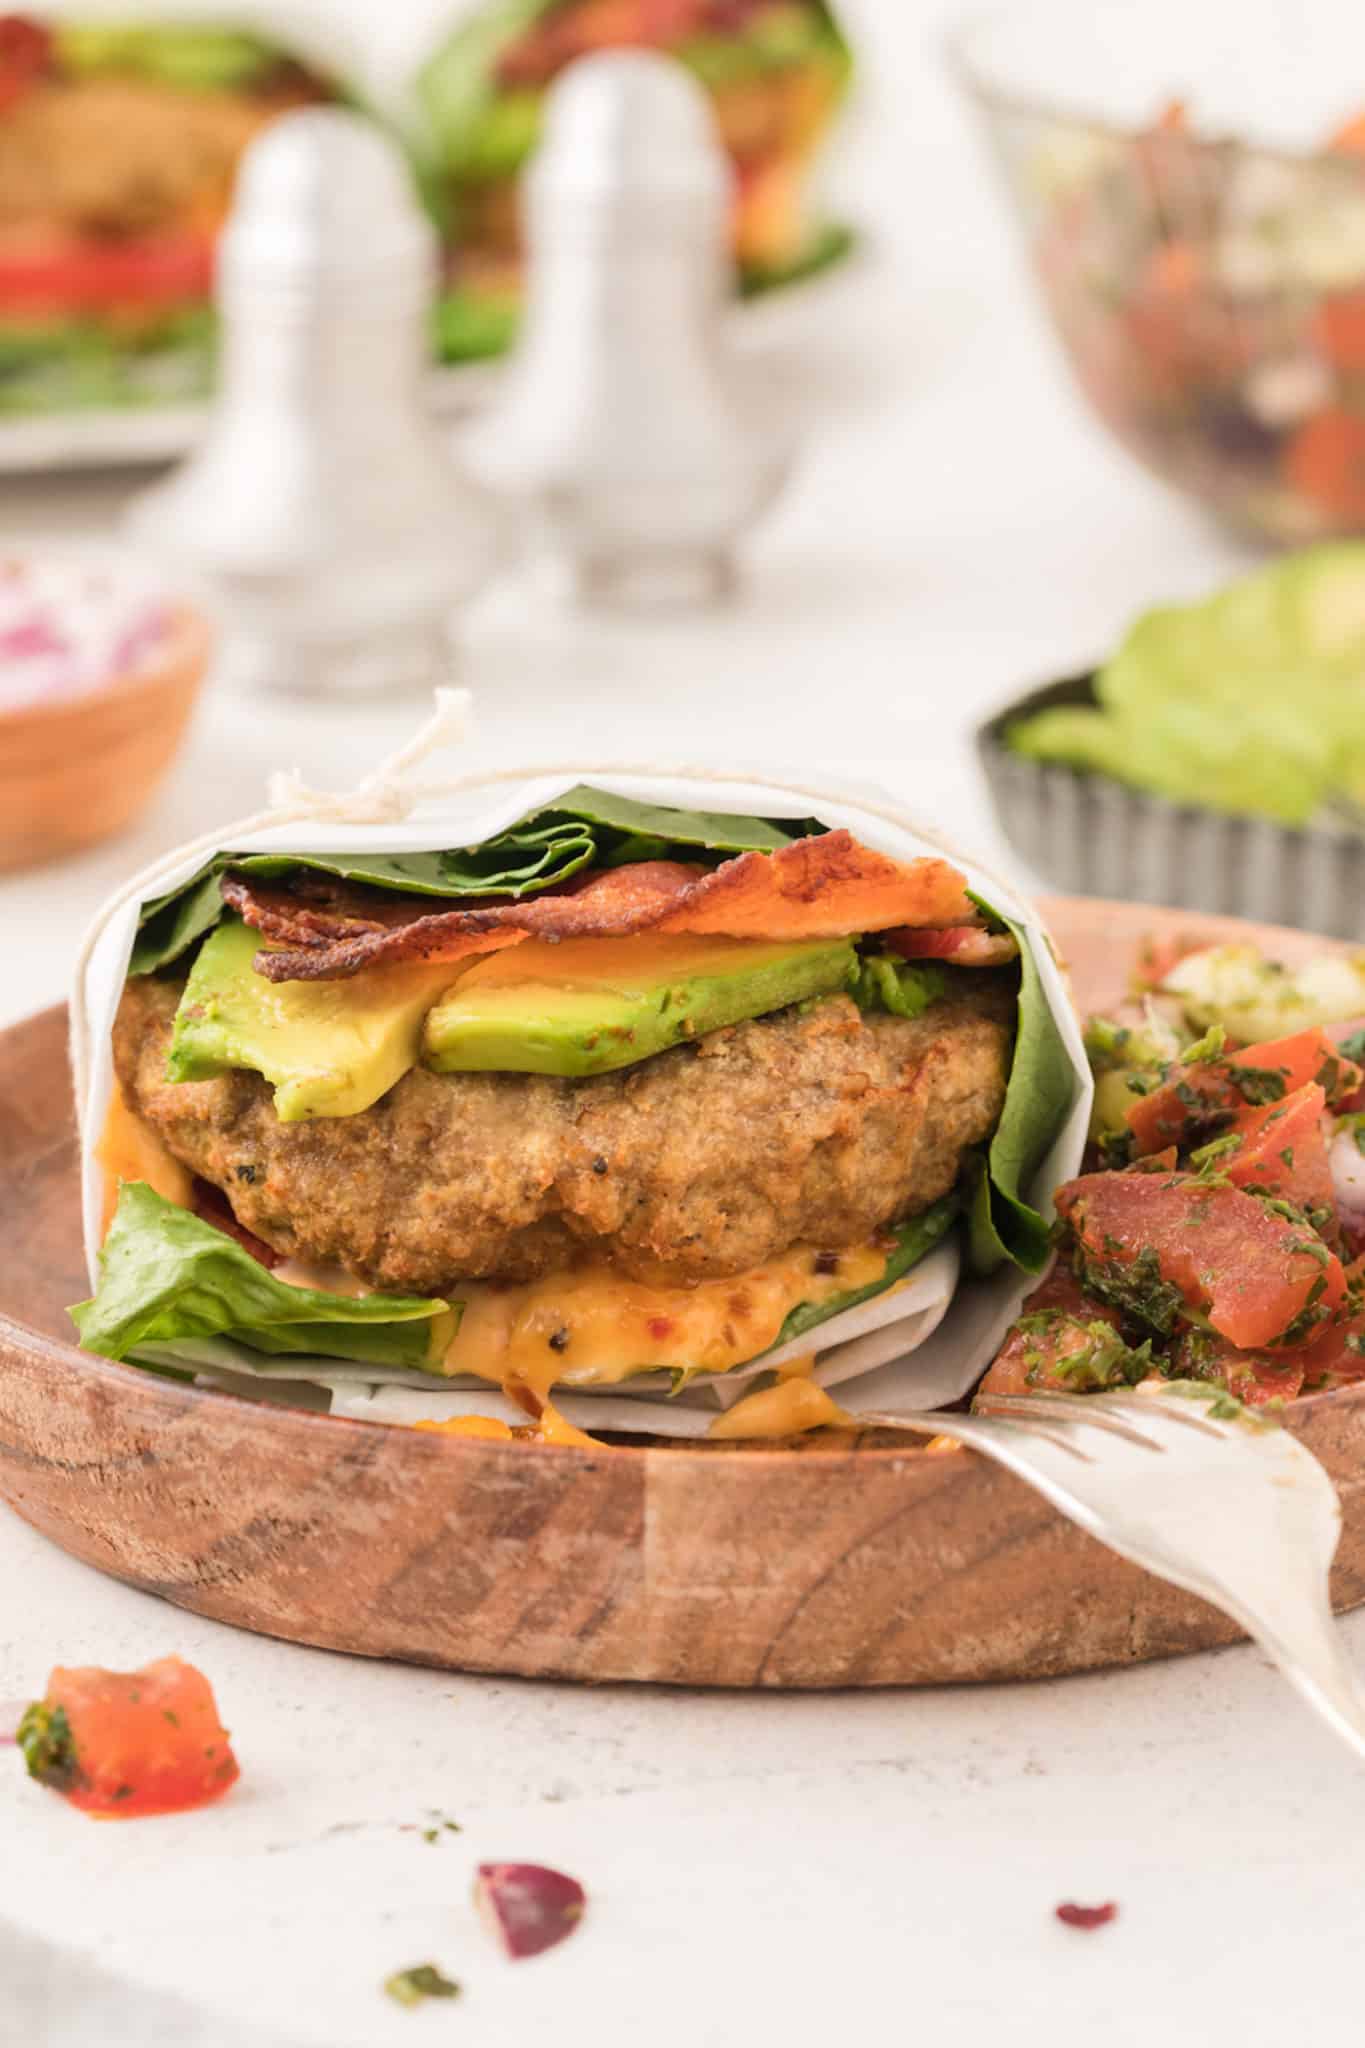 A lettuce wrapped turkey burger.